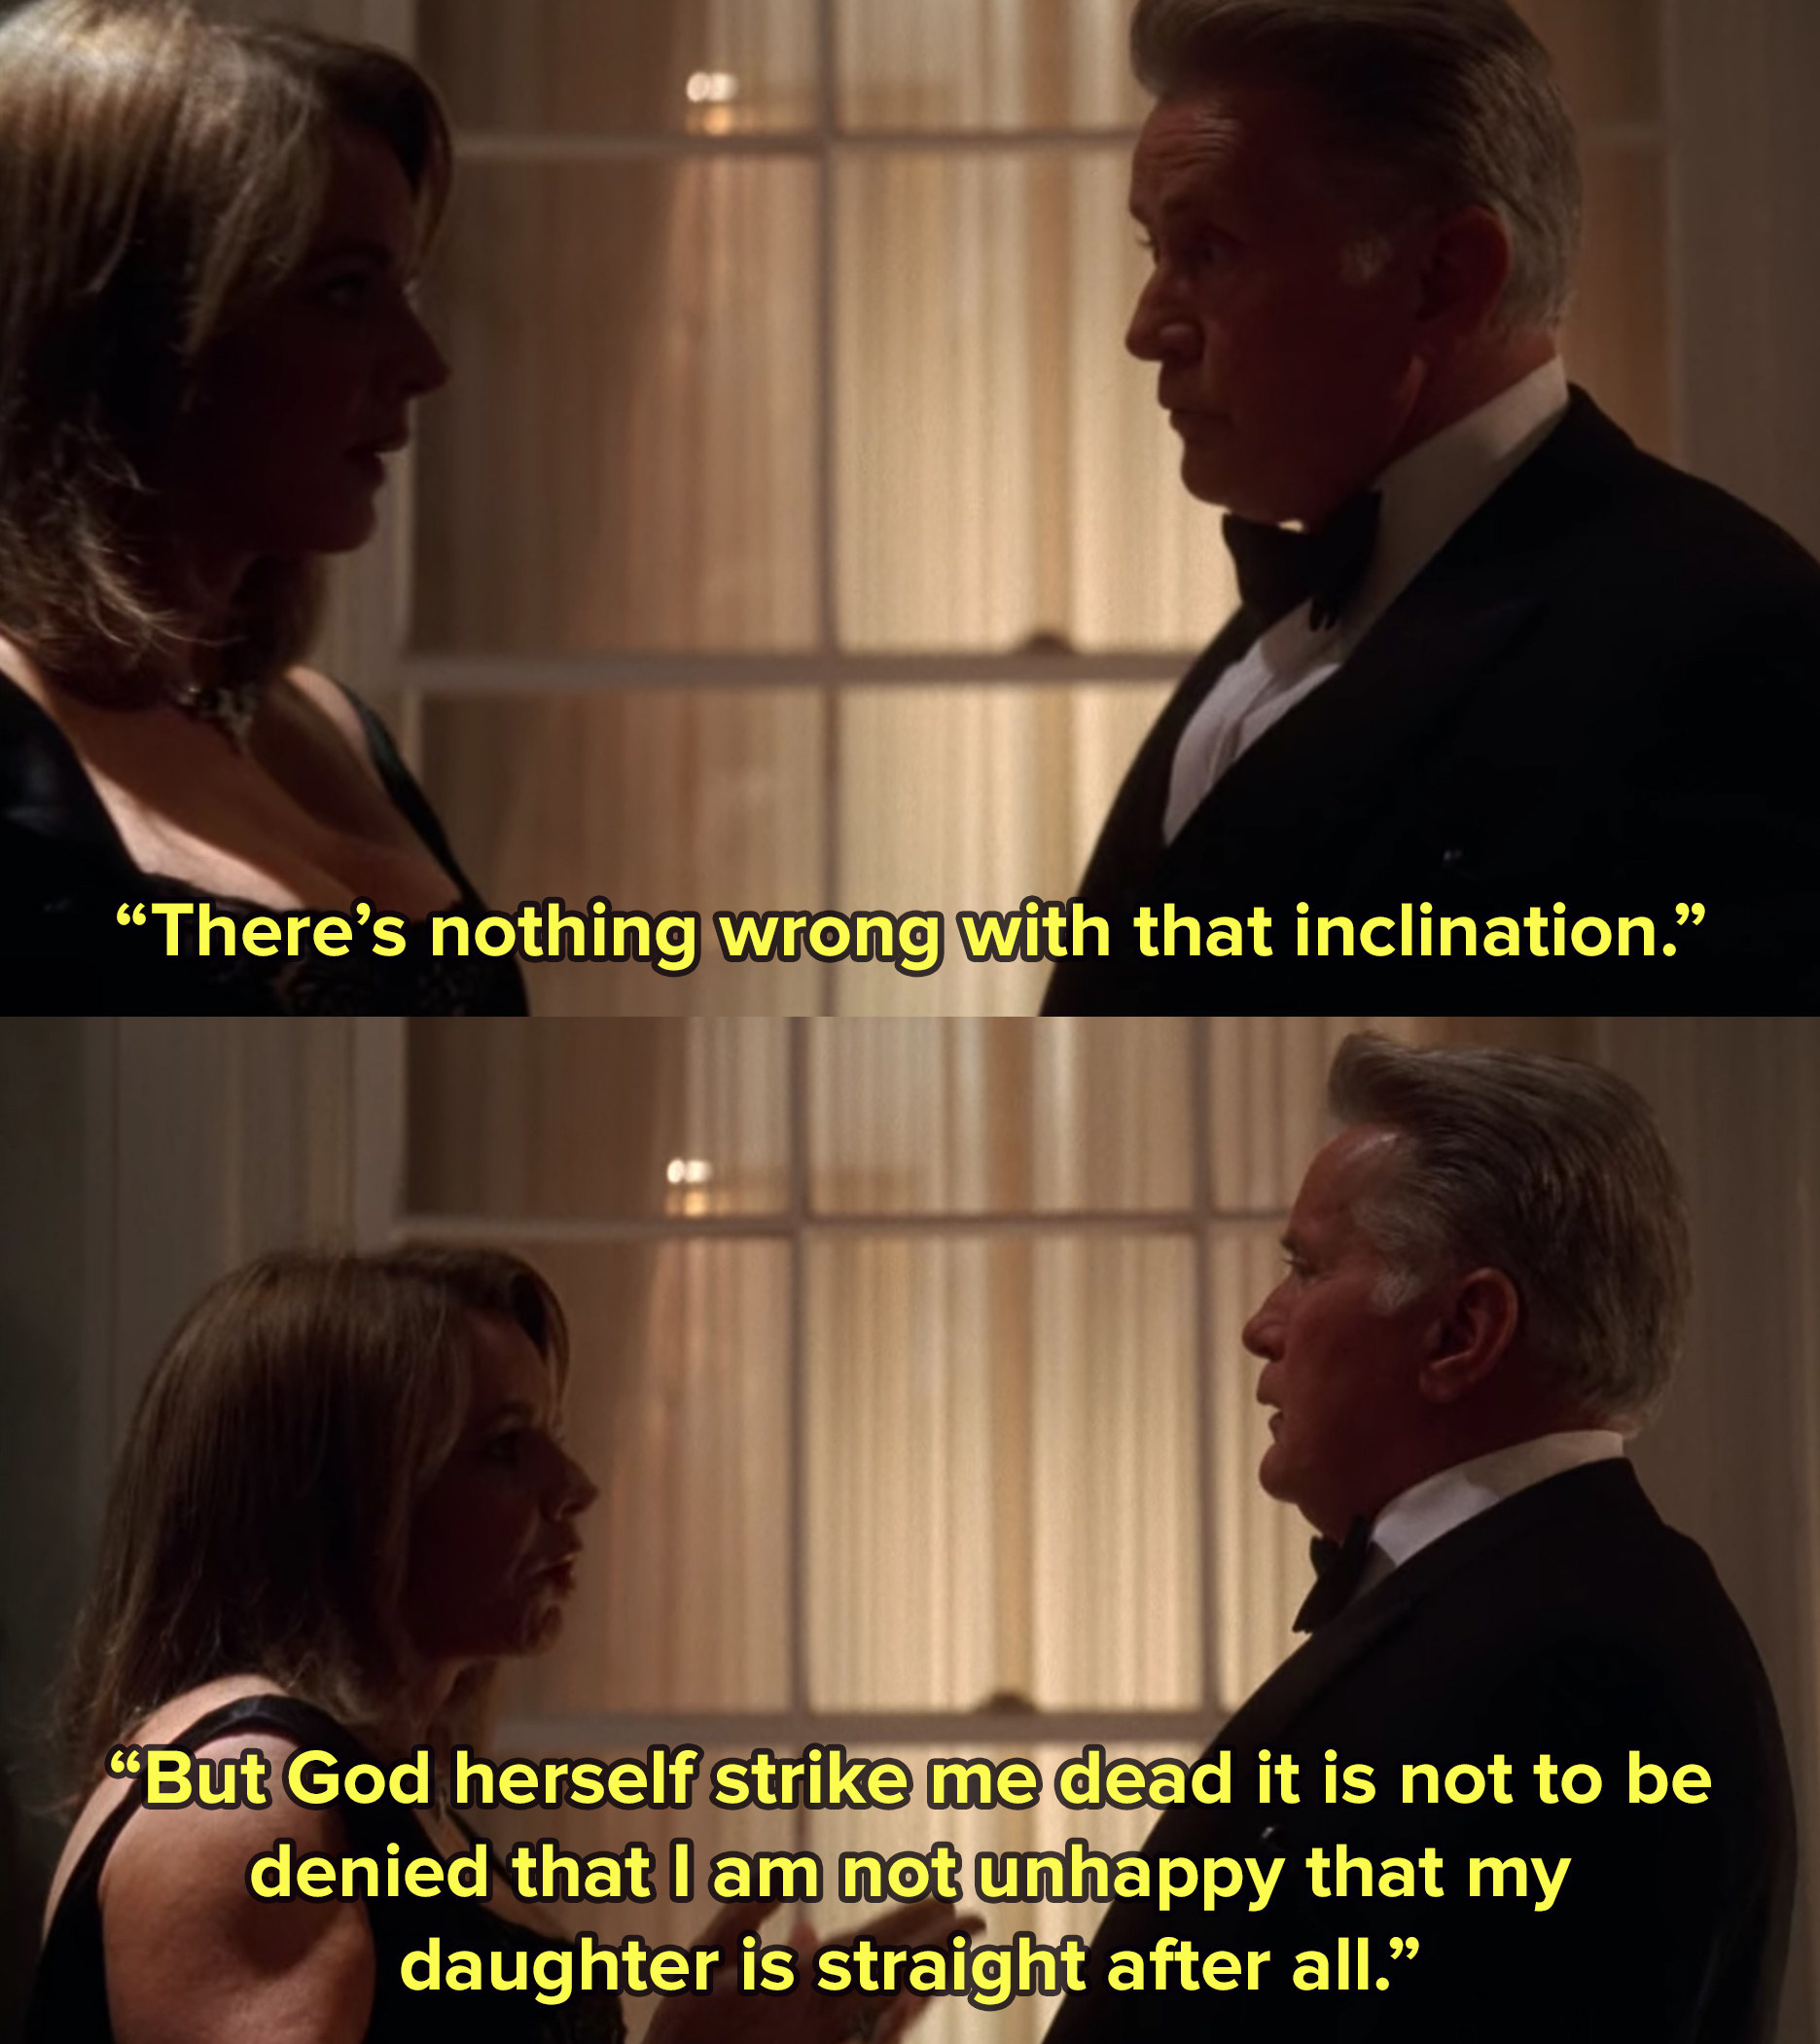 Abby and her husband in The West Wing wait outside of a function dressed in formal attire and Abby says there&#x27;s nothing wrong with that inclination, but it can&#x27;t be denied that I&#x27;m unhappy my daughter is straight after all